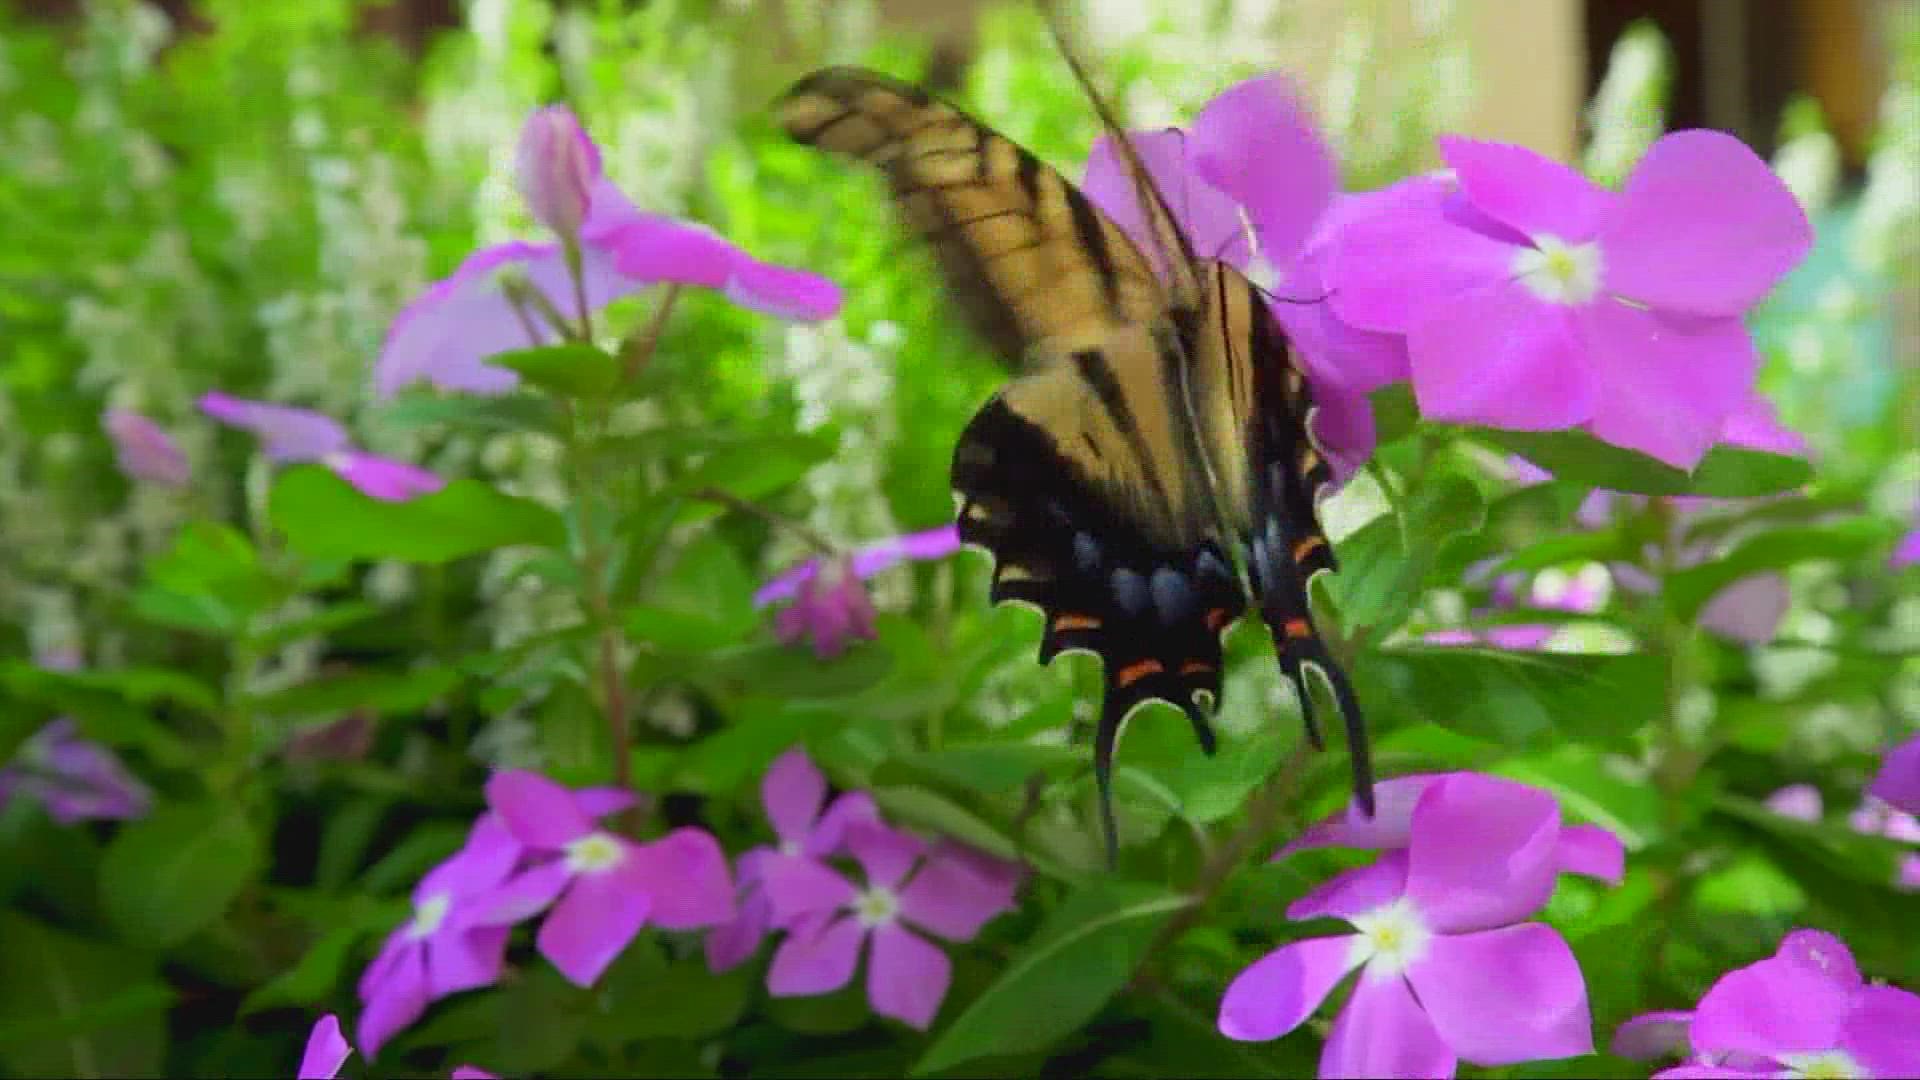 Residents at Judson Park are doing their part to ensure butterflies don't become extinct.